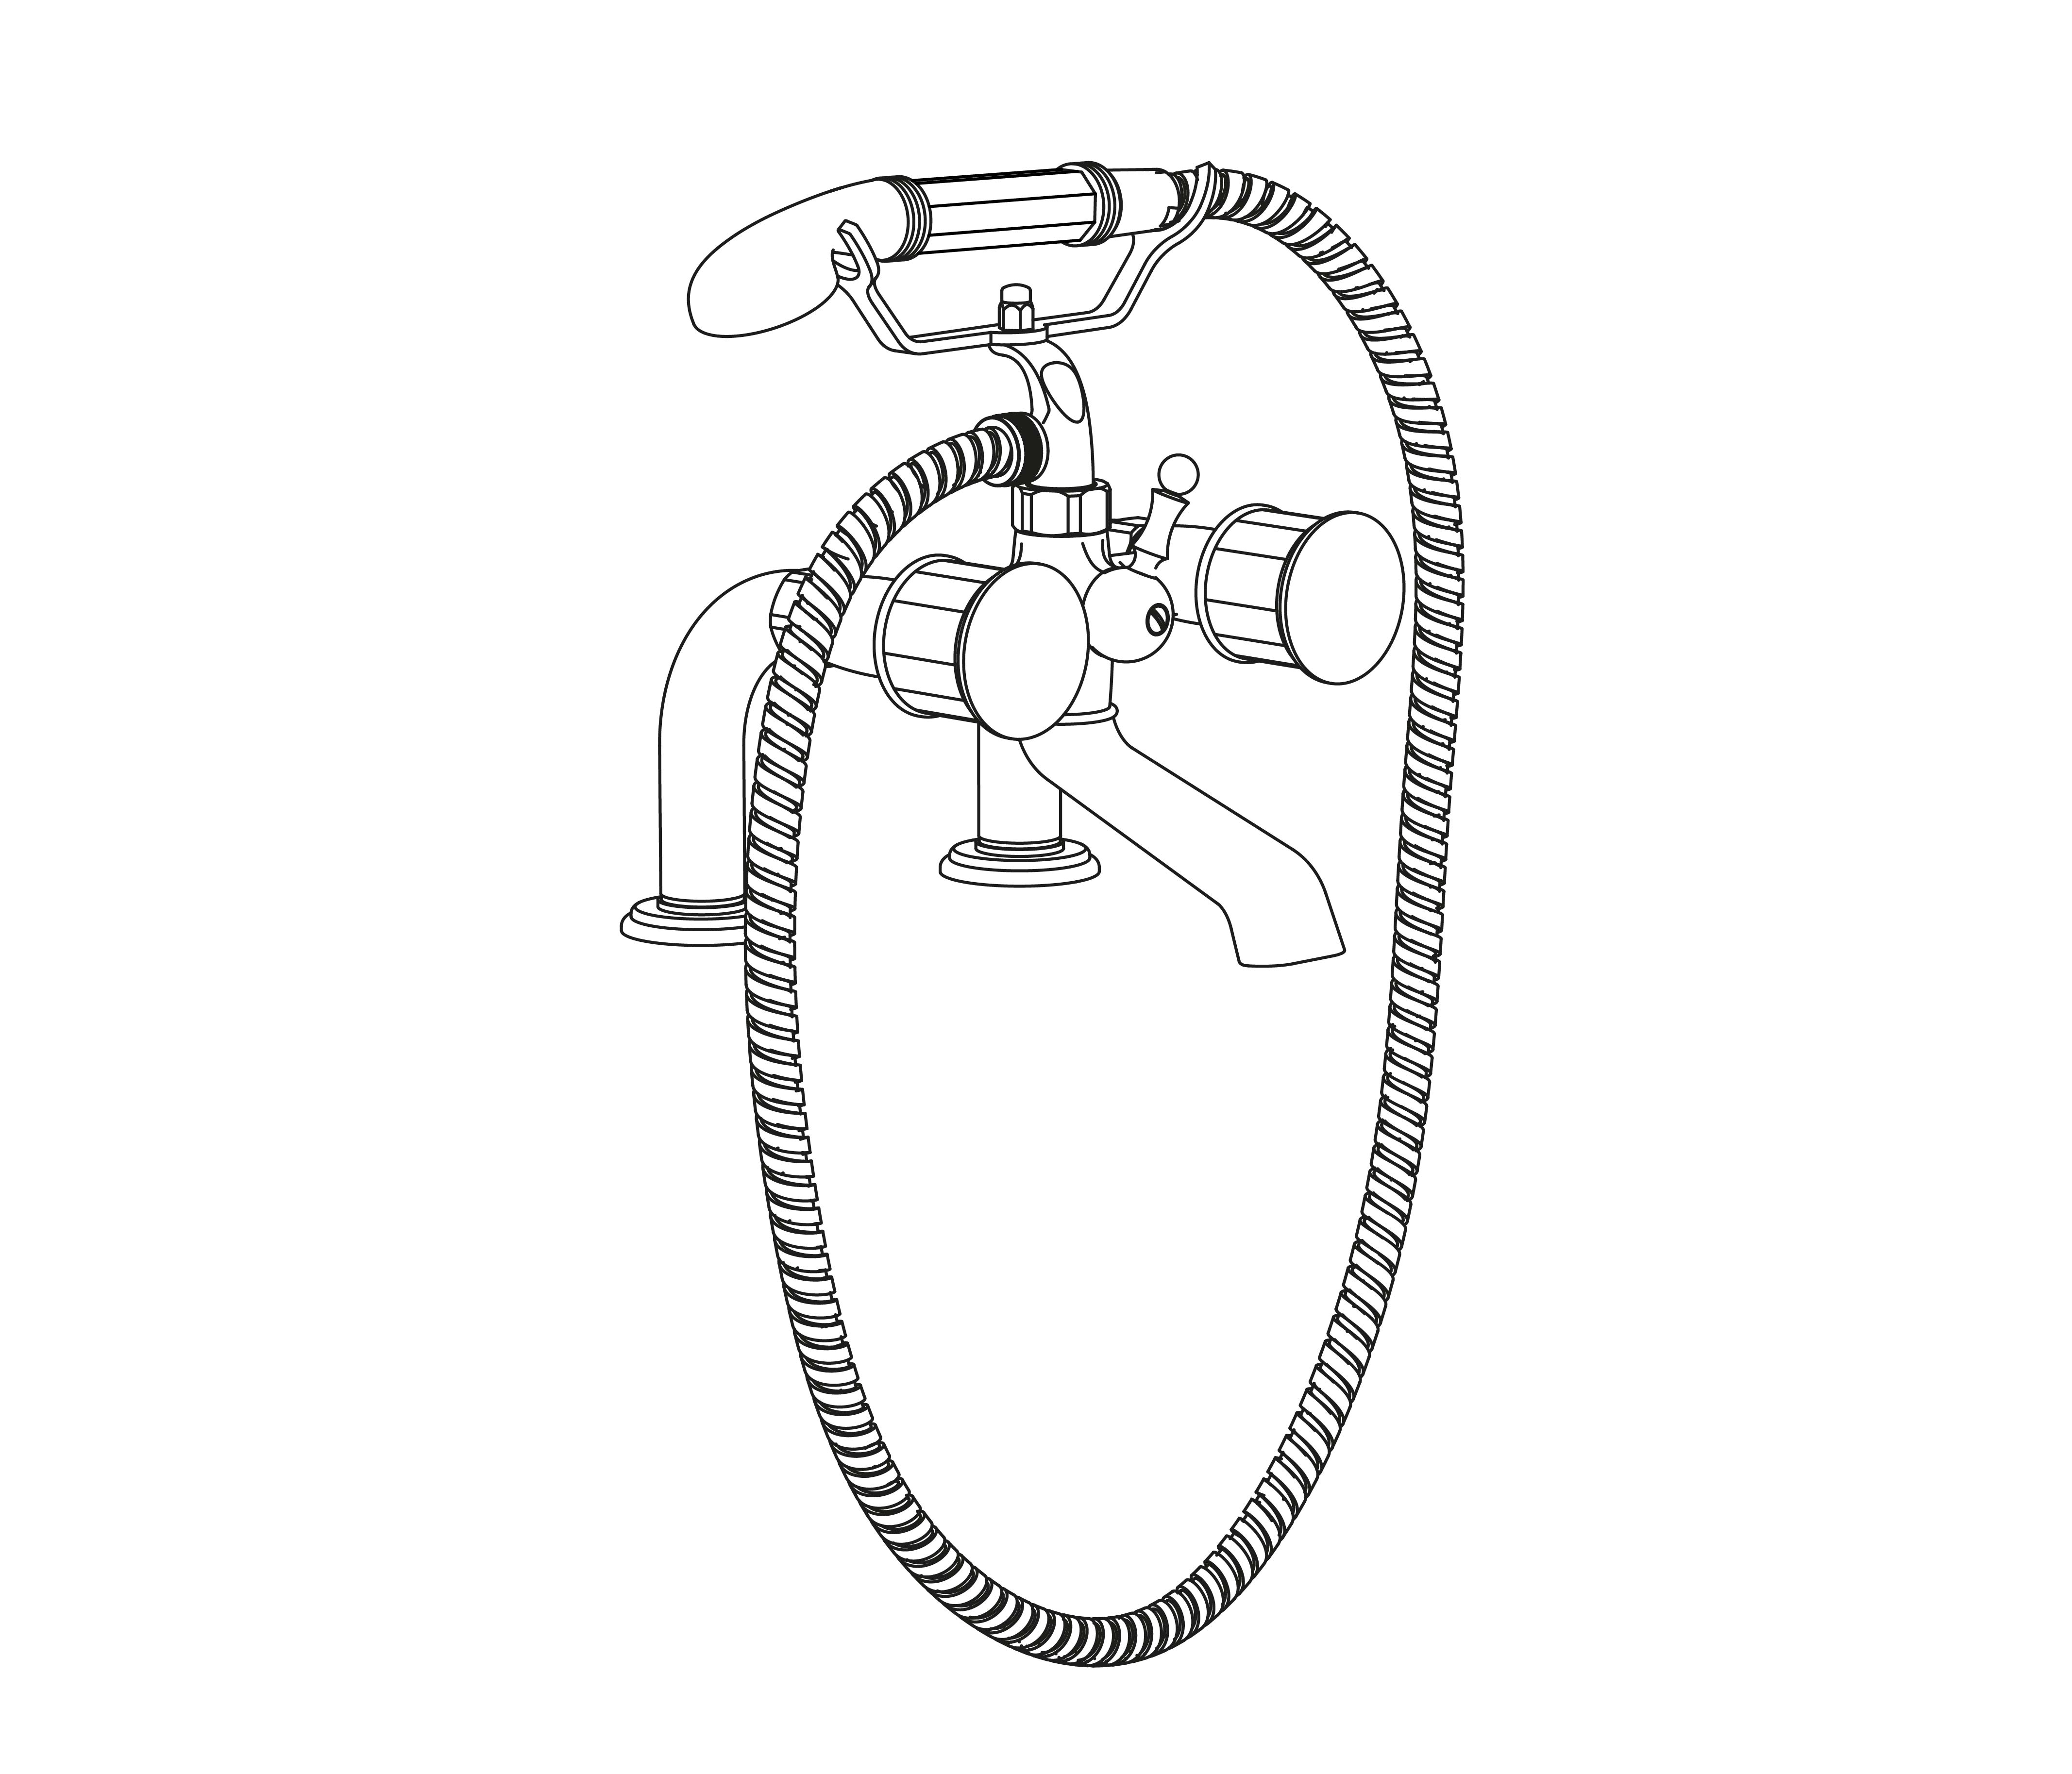 S117-3306 Rim mounted bath and shower mixer